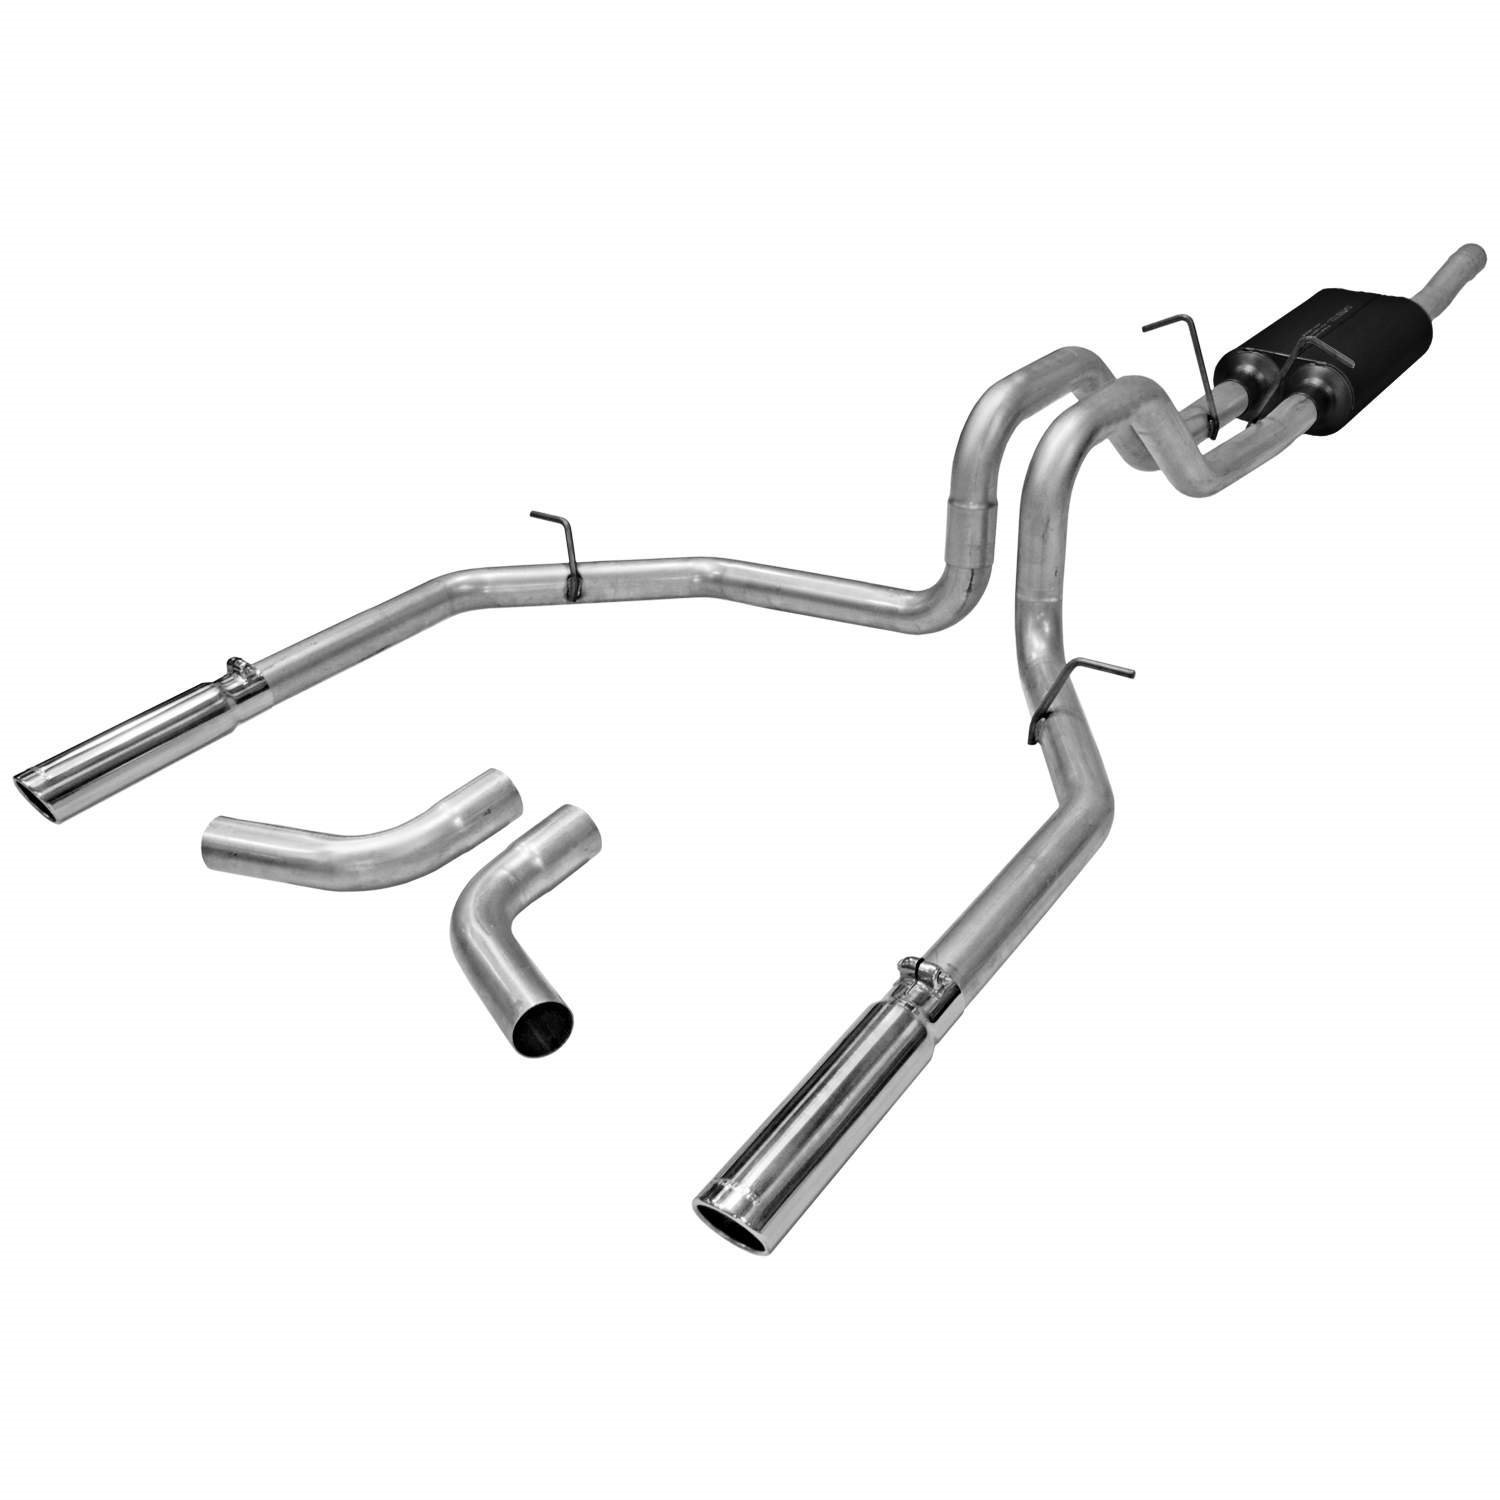 2003 Ford F150 Exhaust System Review